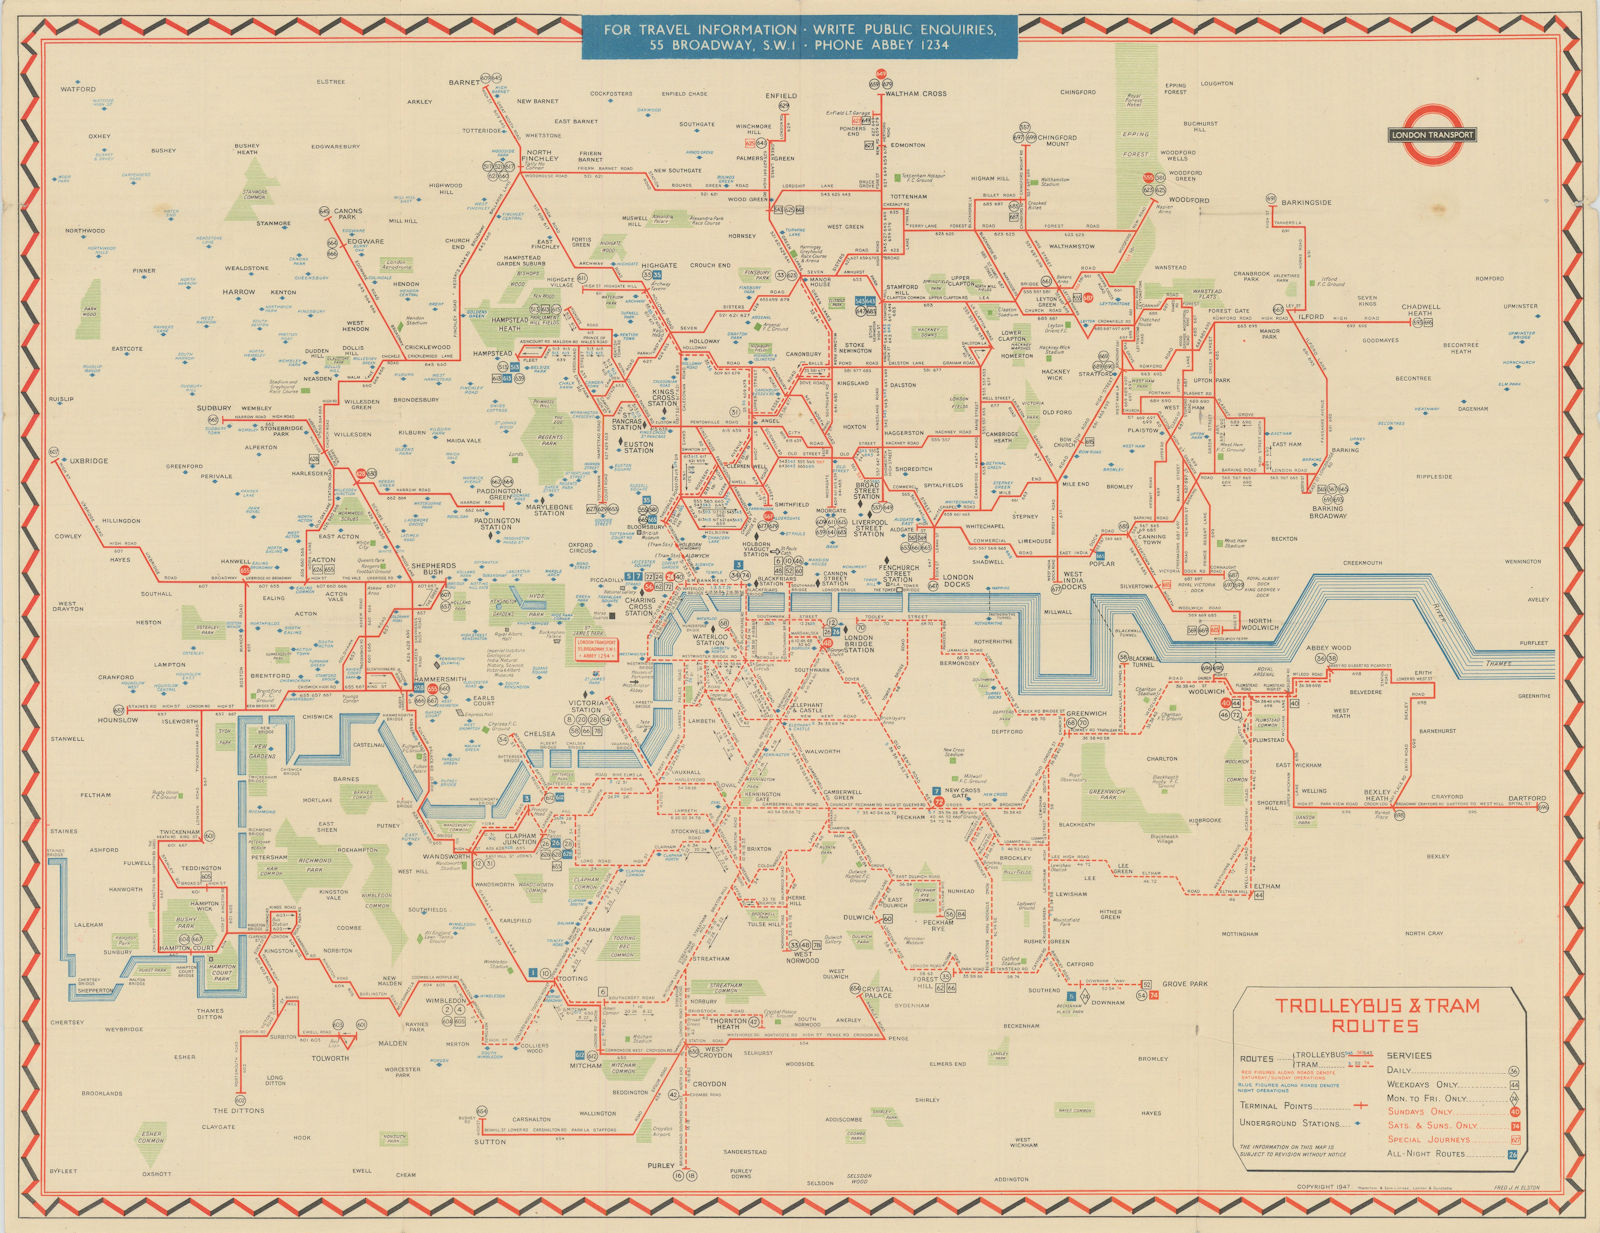 London Transport Trolleybus & Tram map of Routes. ELSTON. #2 1947 old